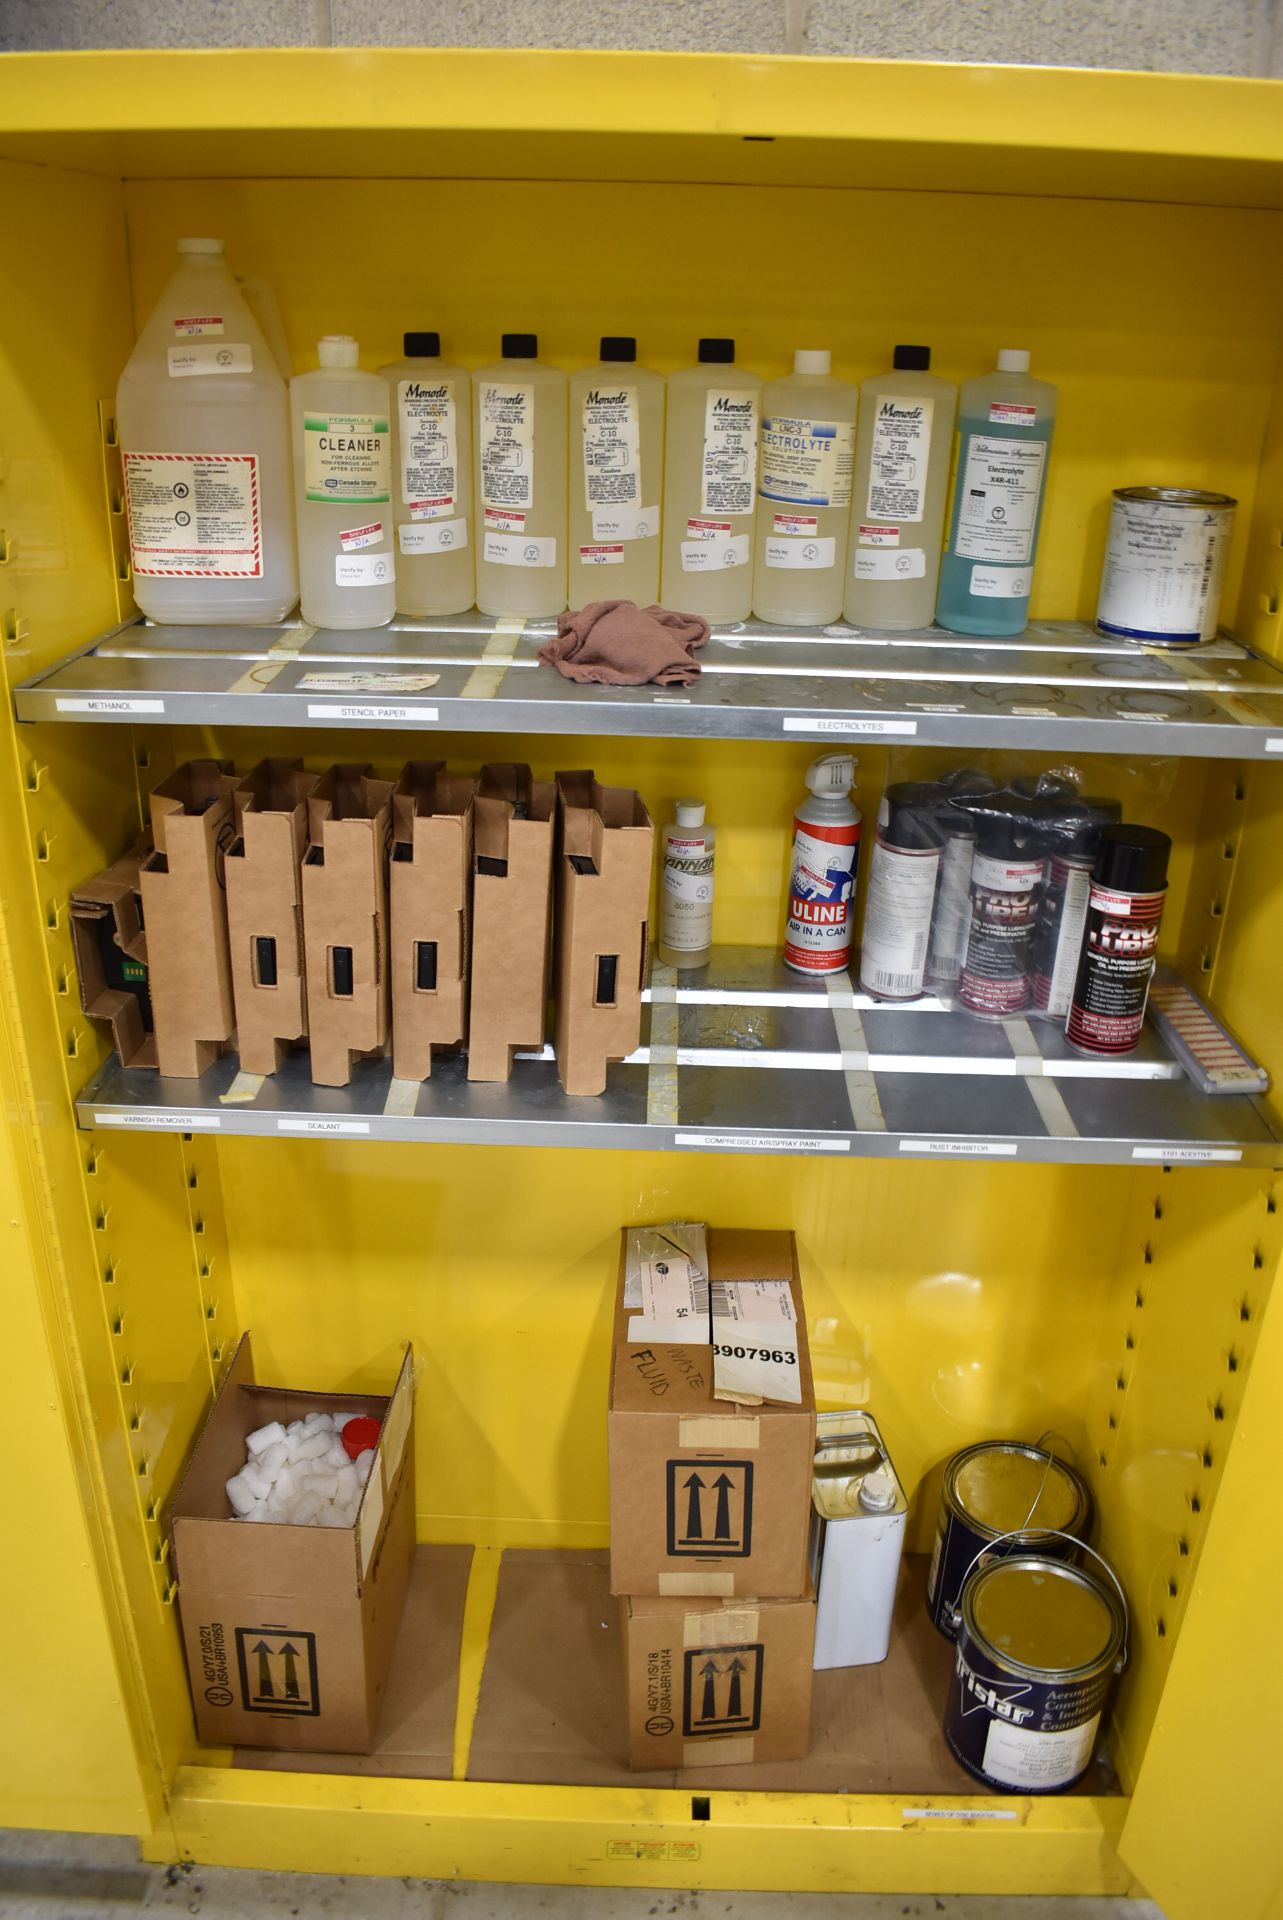 LOT/ JUSTRITE FIREPROOF CABINET WITH SUPPLIES - Image 2 of 4